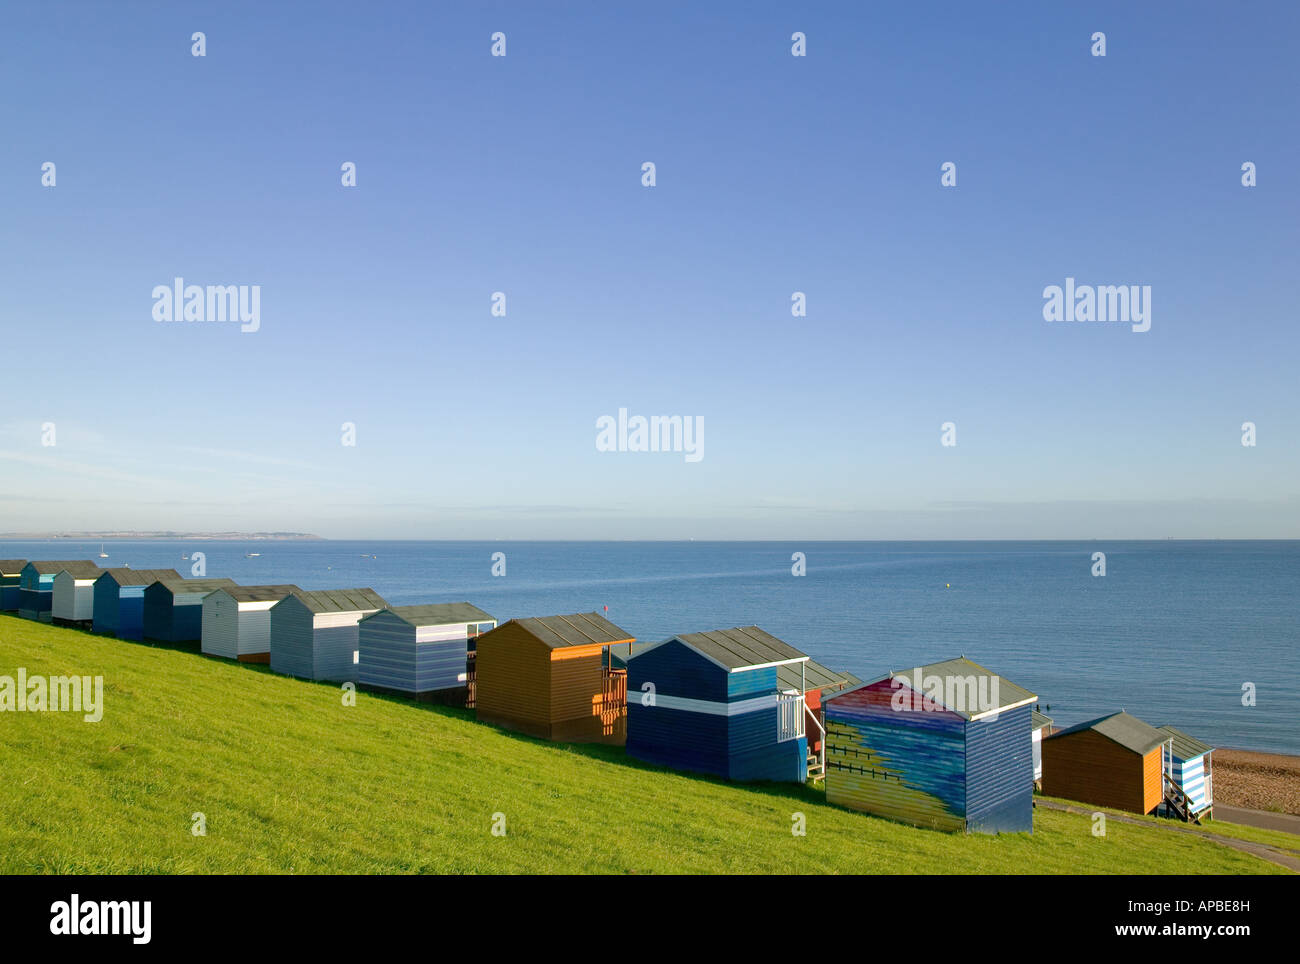 Beach huts overlooking the sea at Tankerton near Whitstable Kent England Stock Photo